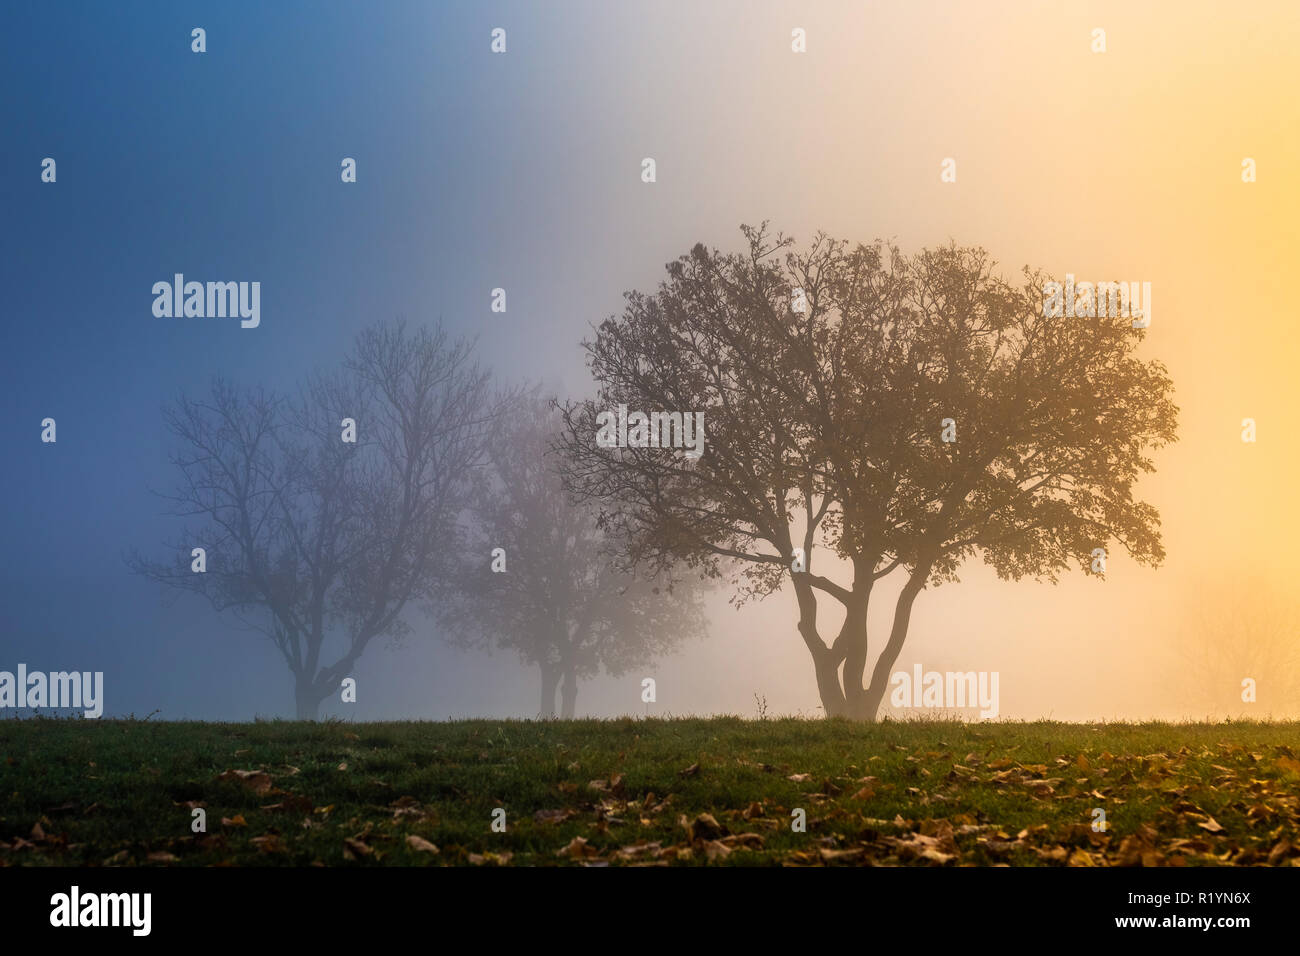 Budapest, Hungary - Beautiful blue and orange foggy morning at top of Gellert Hill with trees on the field at sunrise Stock Photo